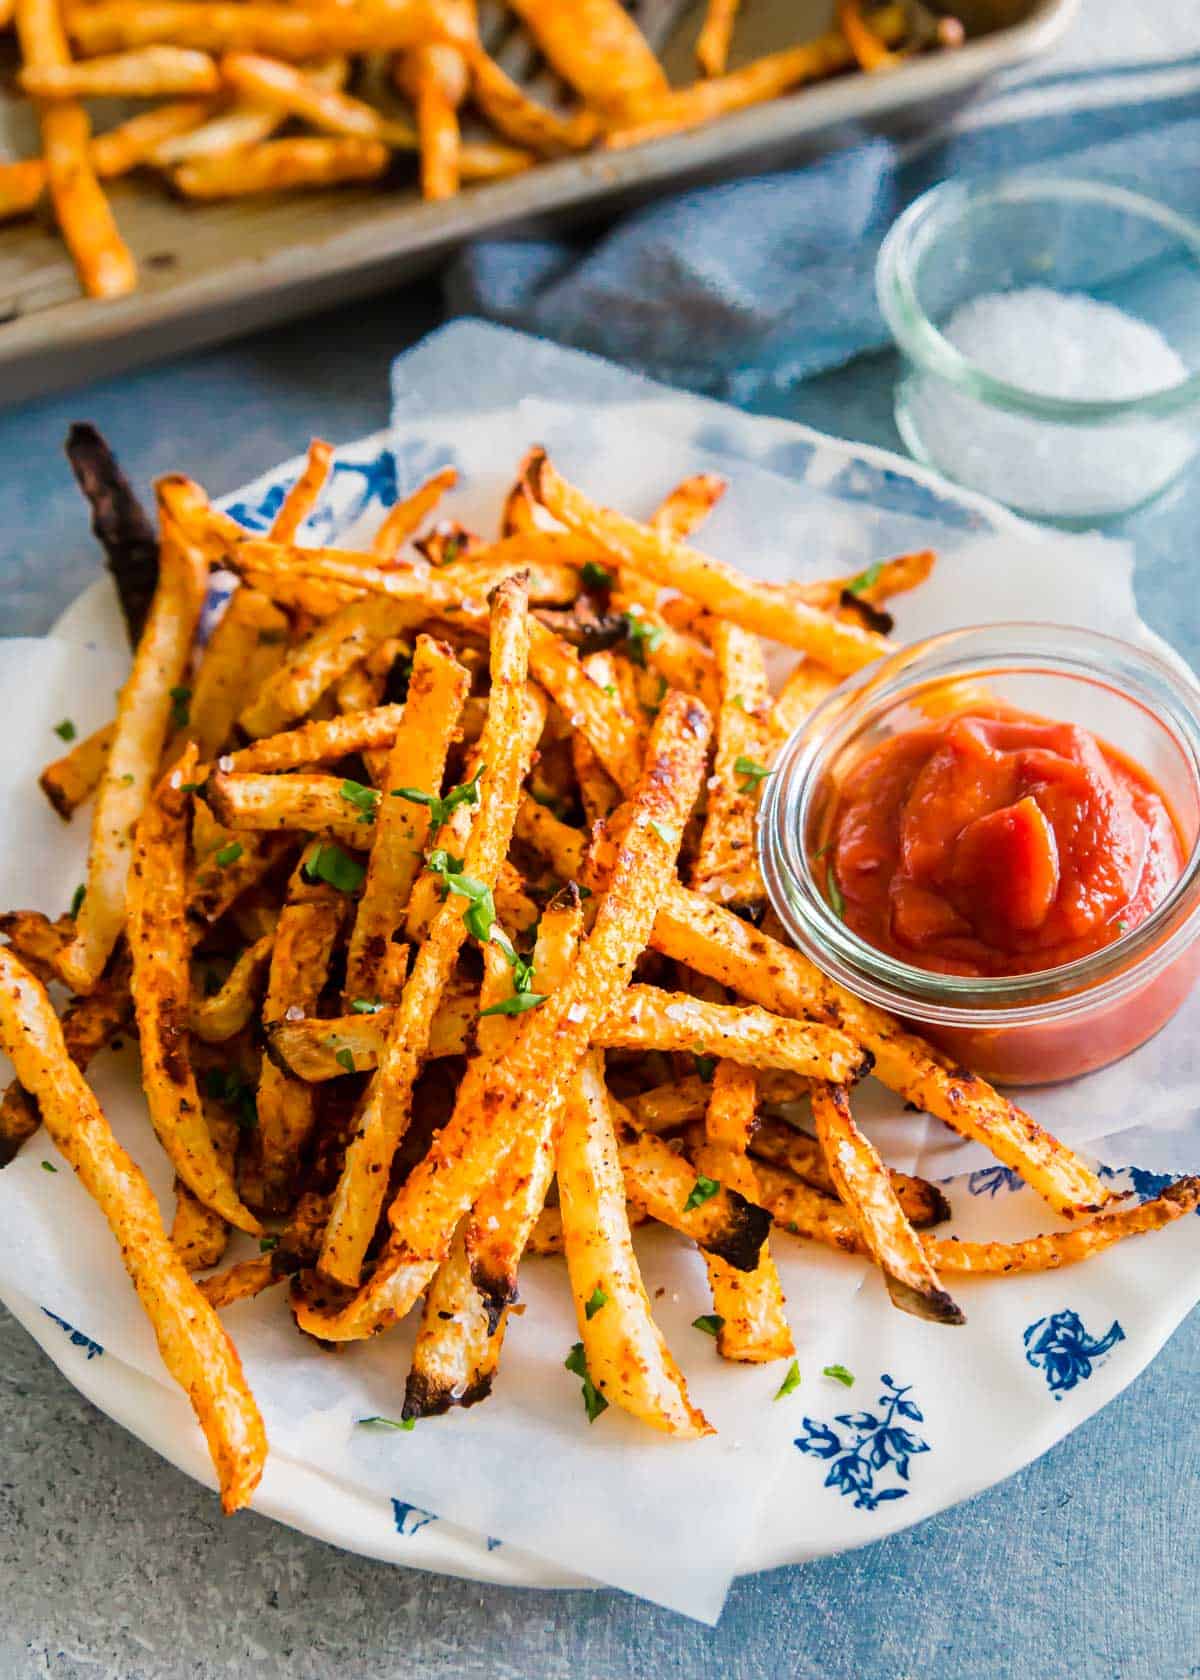 These thin cut jicama fries bake up easily in the oven with the perfect crispy fry texture.